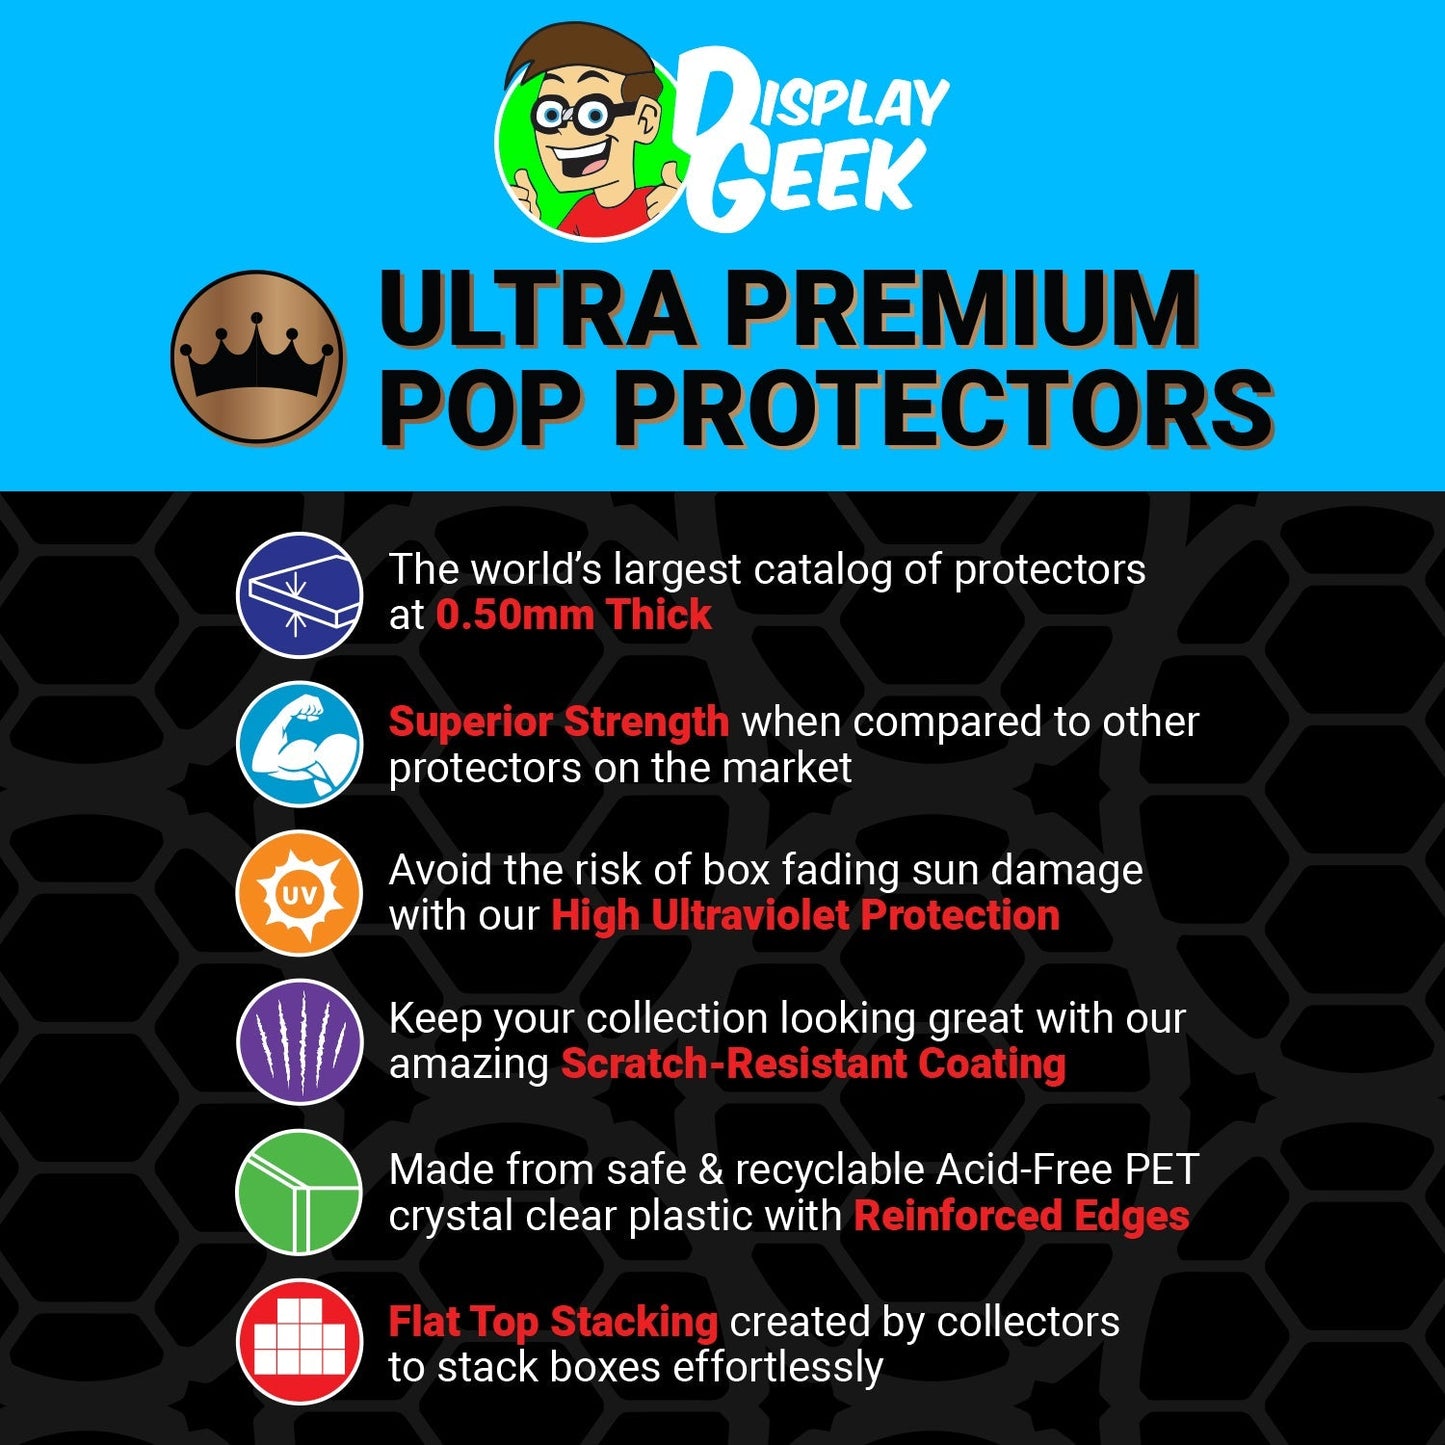 Pop Protector for Batman #02 Funko Pop Comic Covers - PPG Pop Protector Guide Search Created by Display Geek